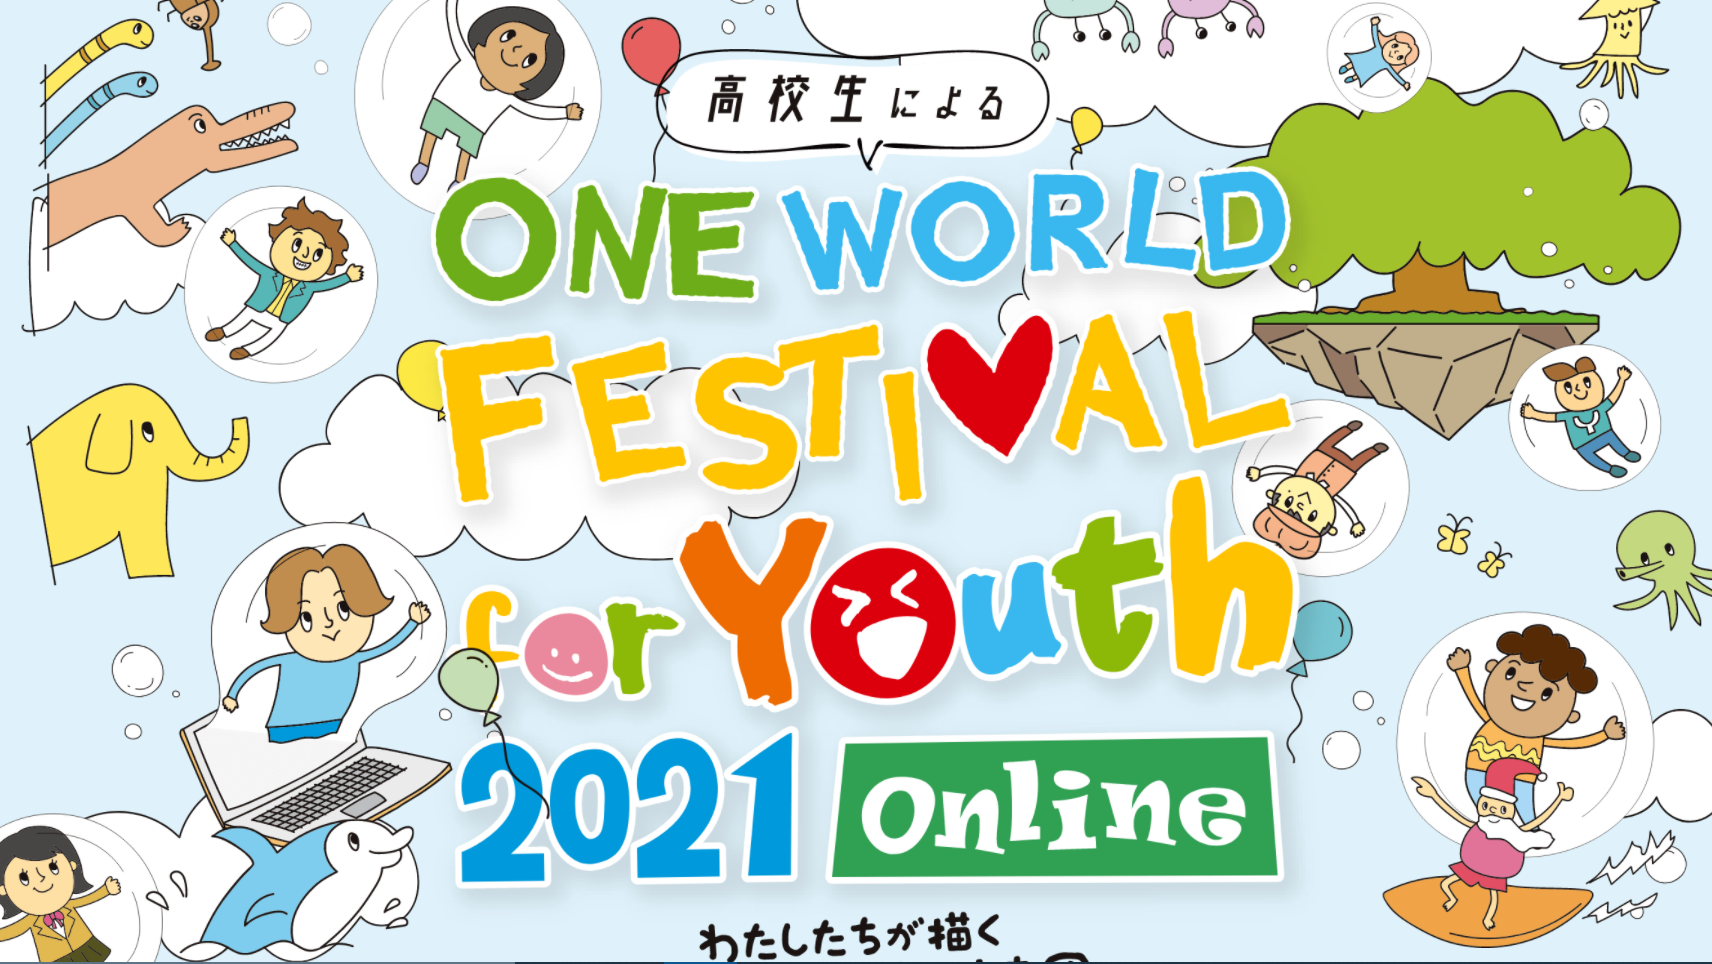 ONE WORLD FESTIVAL for Youth 2021に出展します！（2021/12/19）